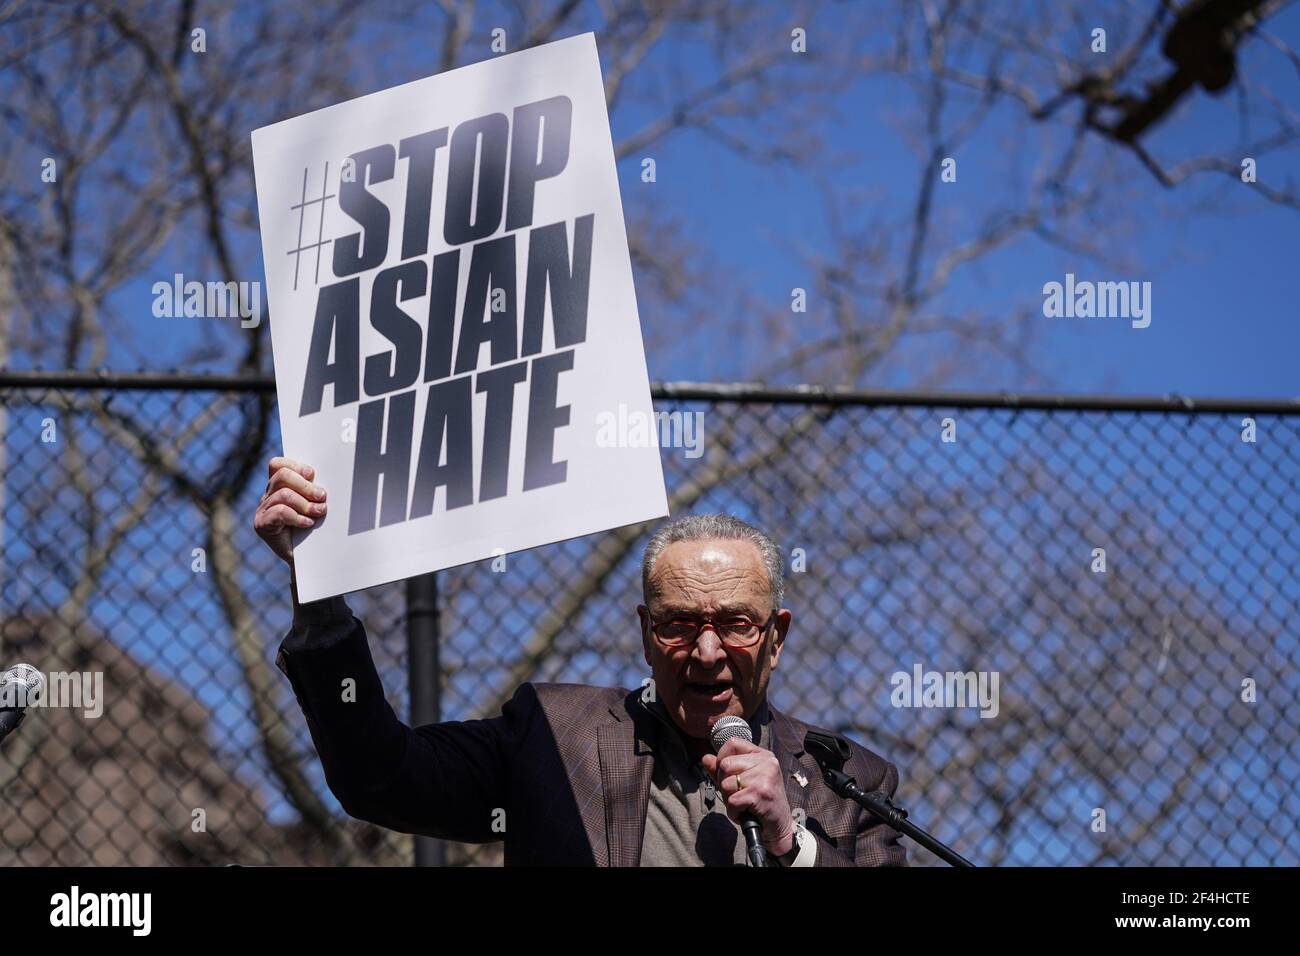 New York City, USA. 20th Mar, 2021. Senate Majority Leader Chuck Schumer (D-NY) speaks during a Stop the Hate rally in Chinatown in New York City, USA. Credit: Chase Sutton/Alamy Live News Stock Photo